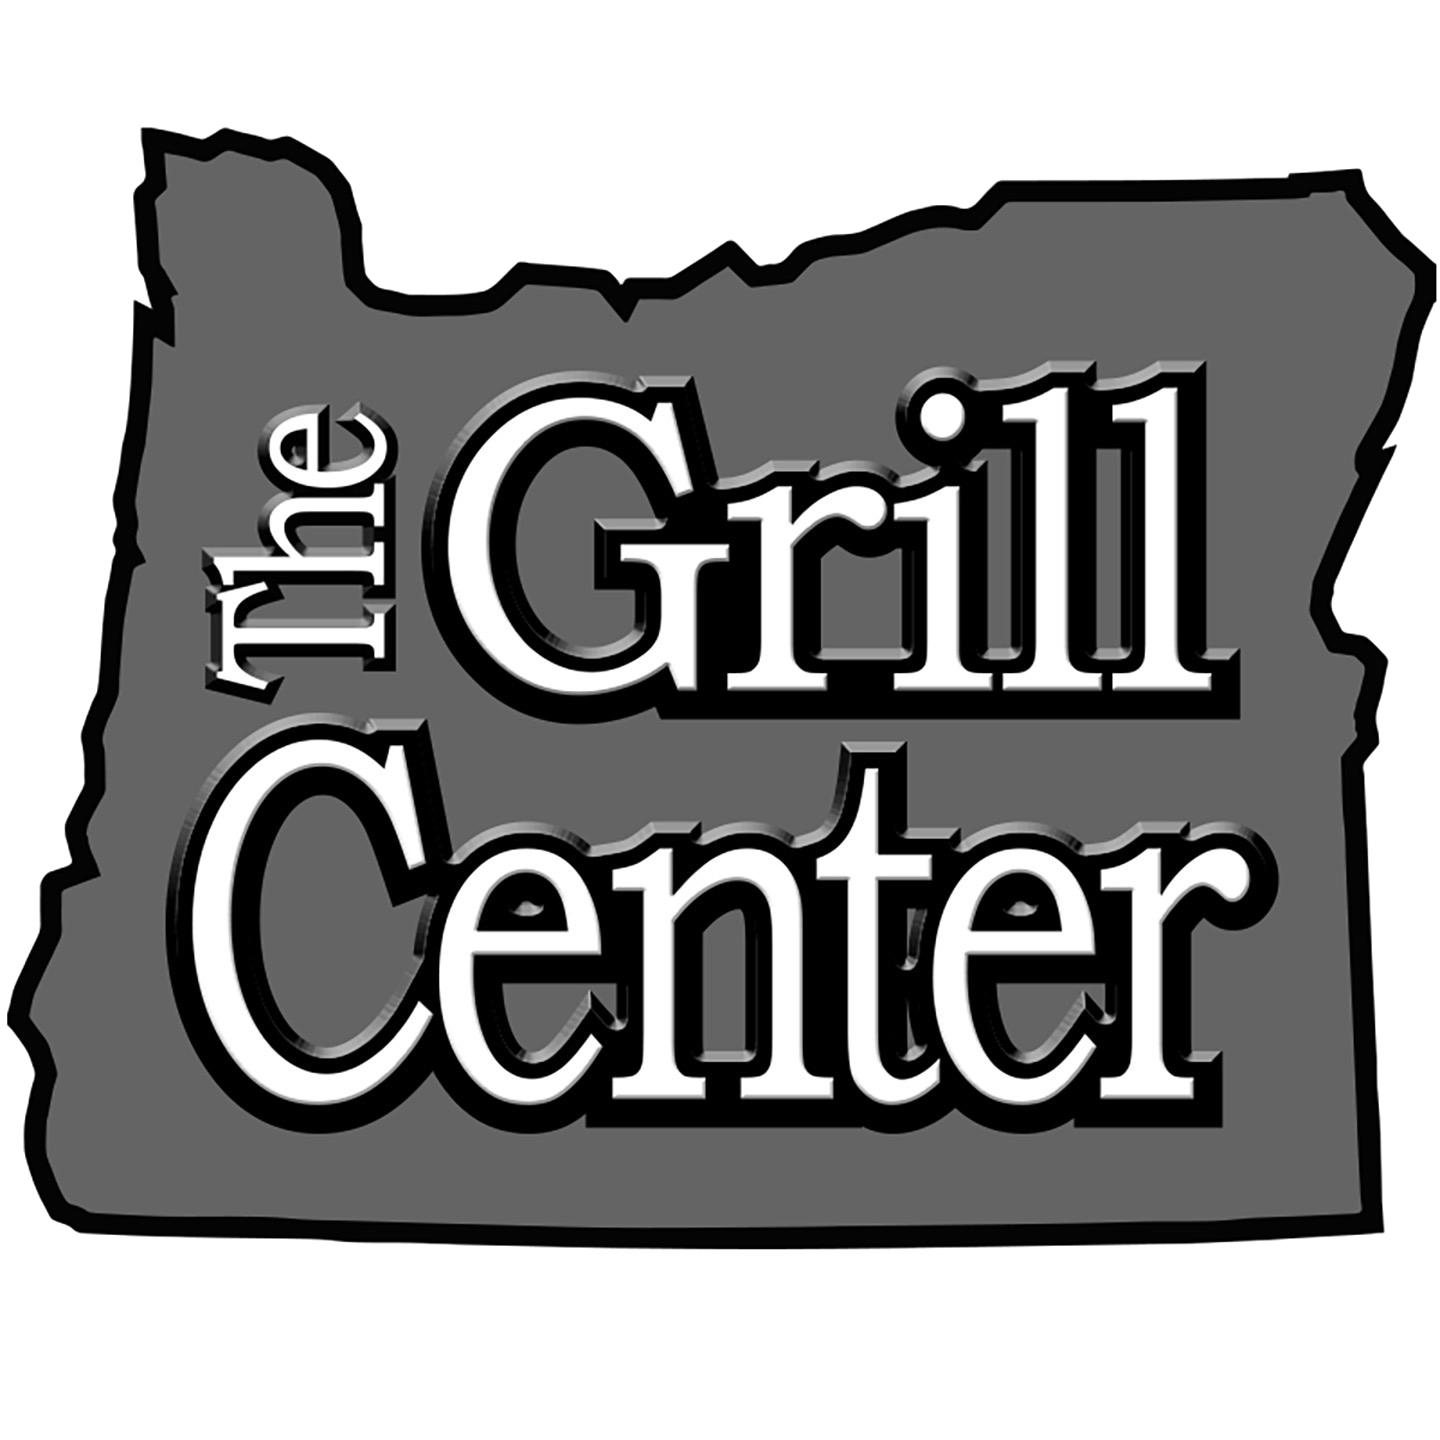 The Grill Center